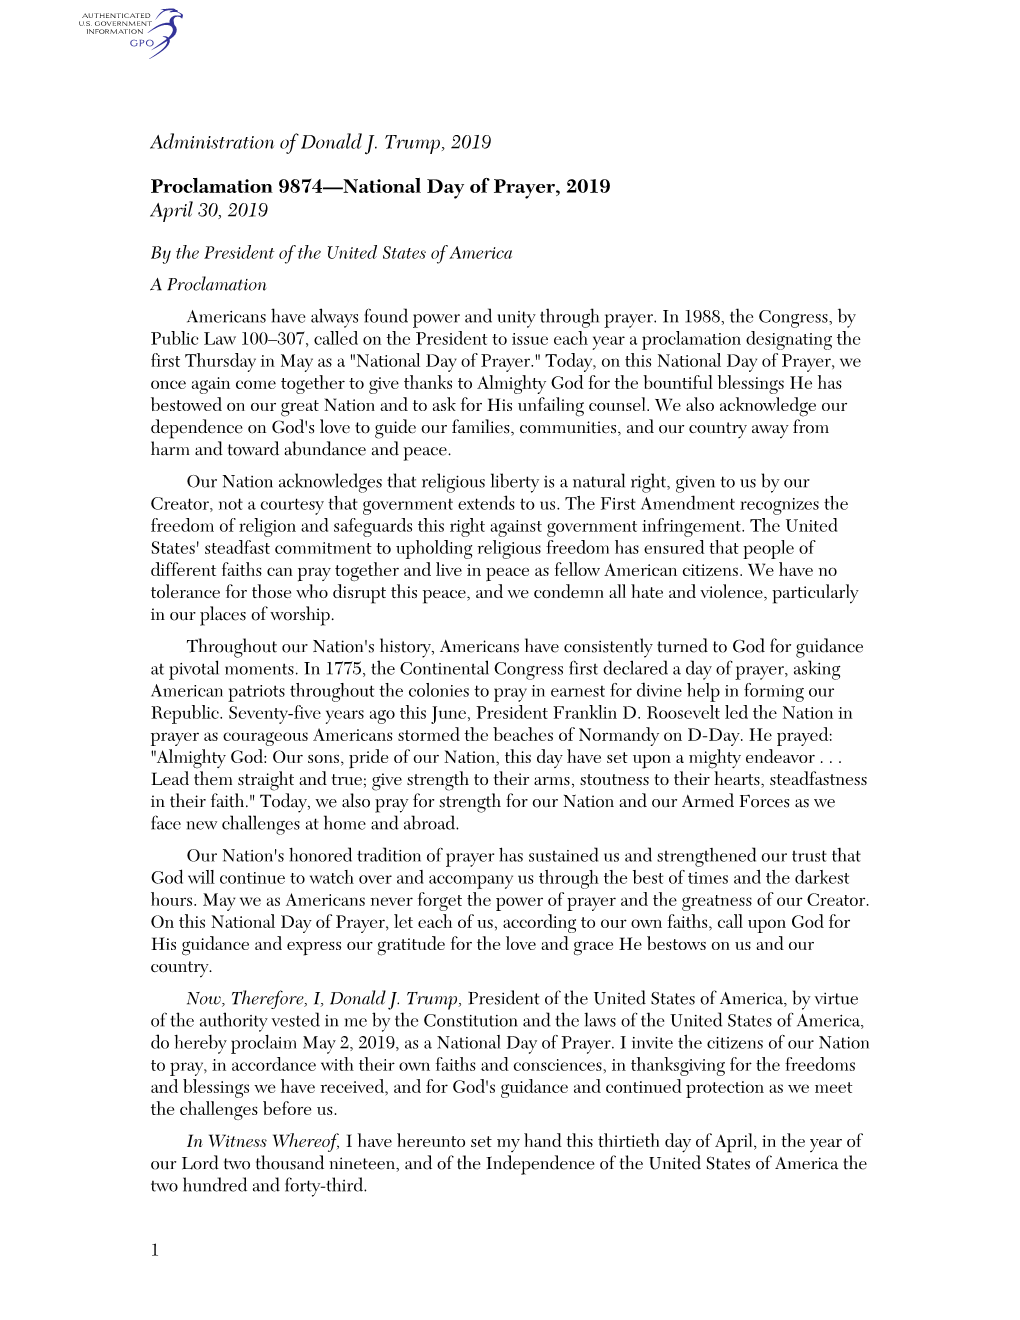 Administration of Donald J. Trump, 2019 Proclamation 9874—National